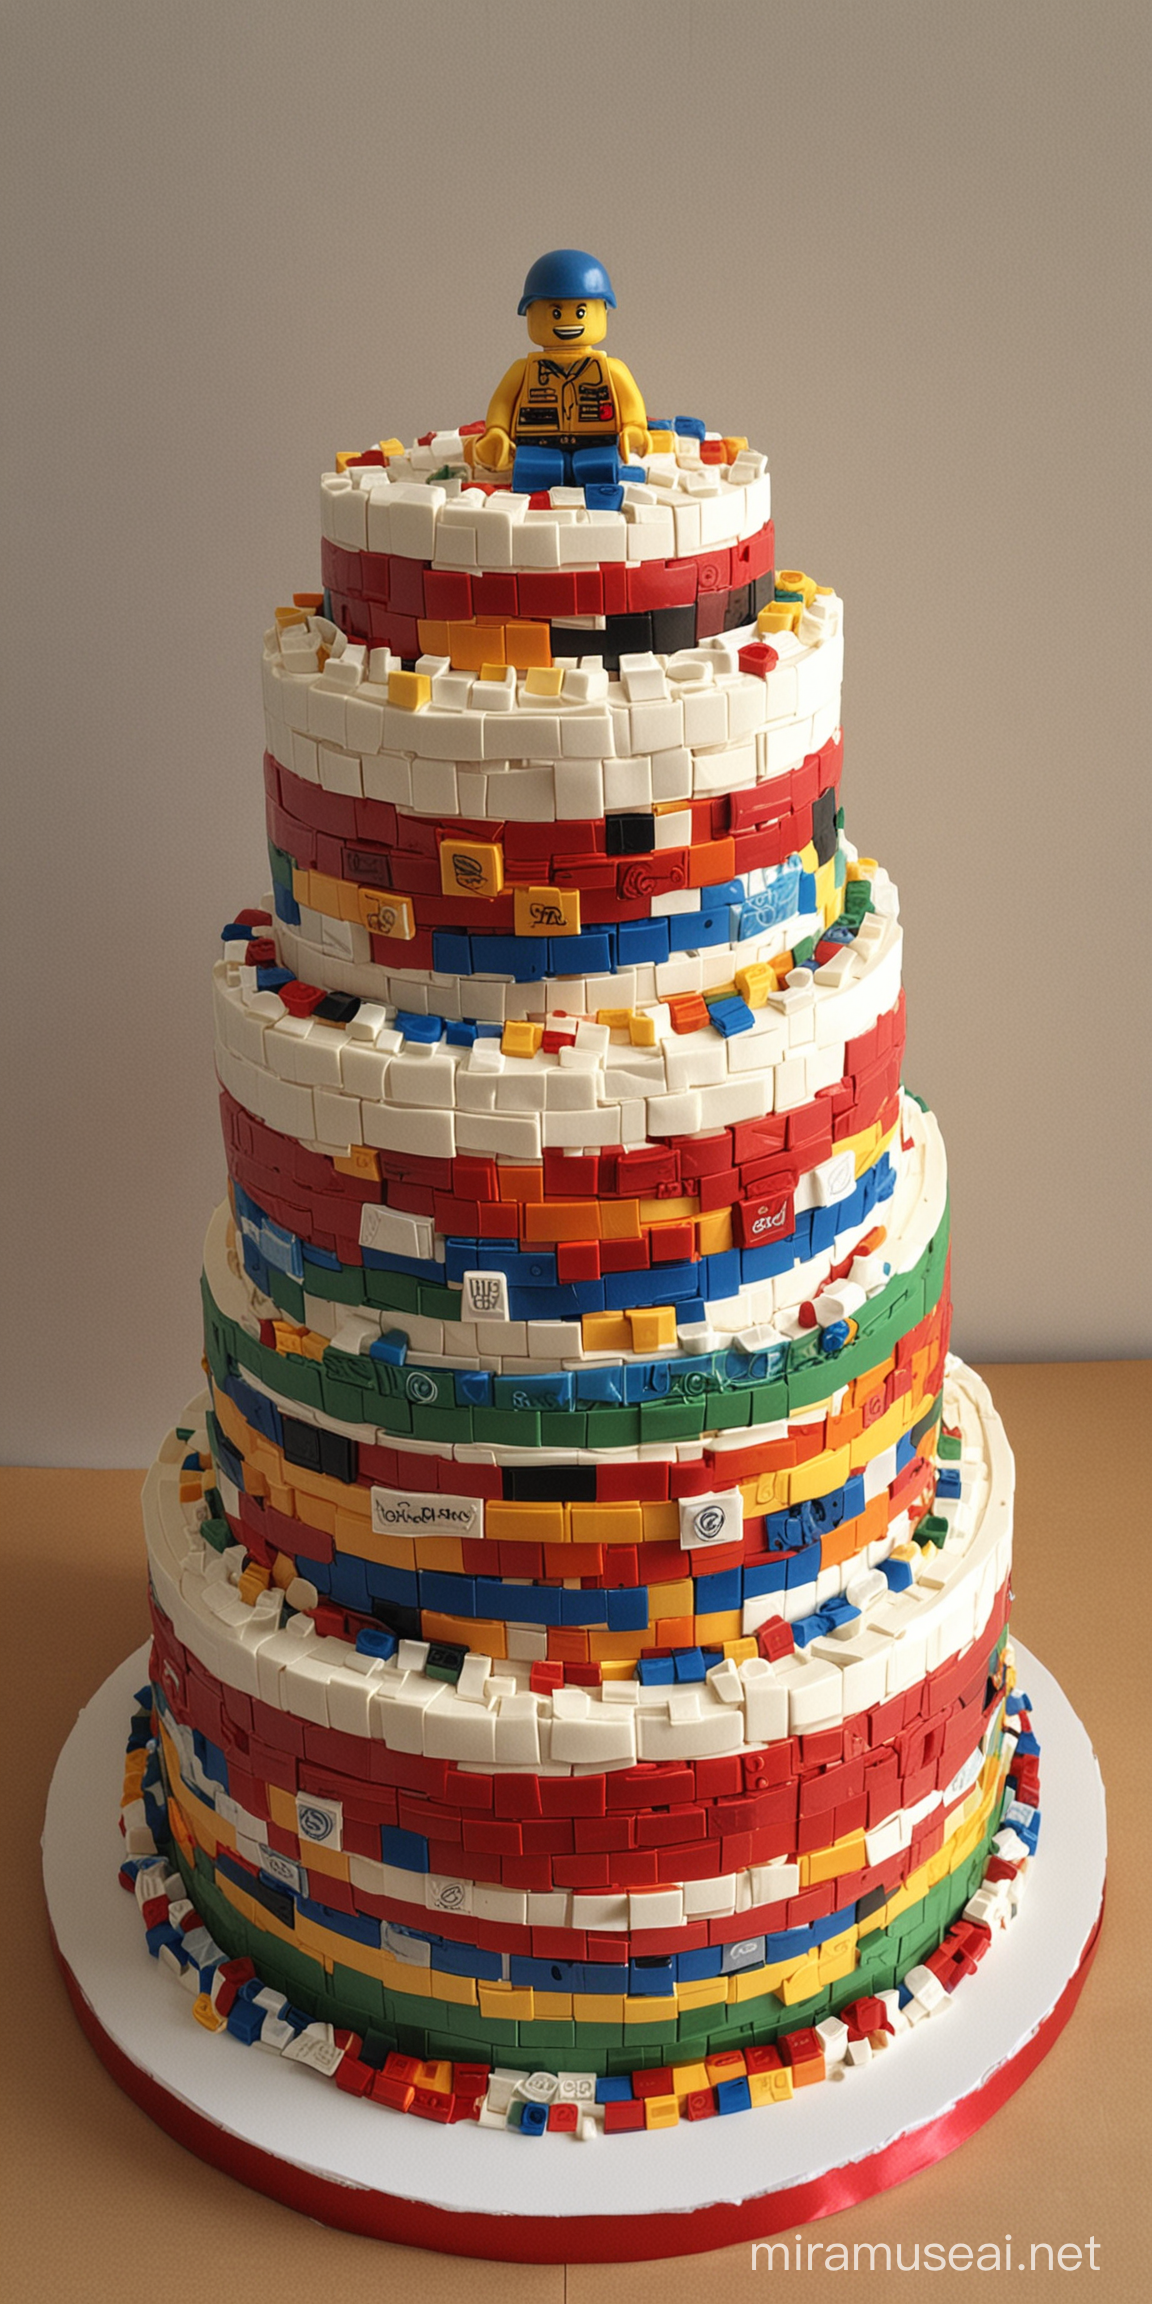 Colorful Lego Cake with Bricks and Minifigures